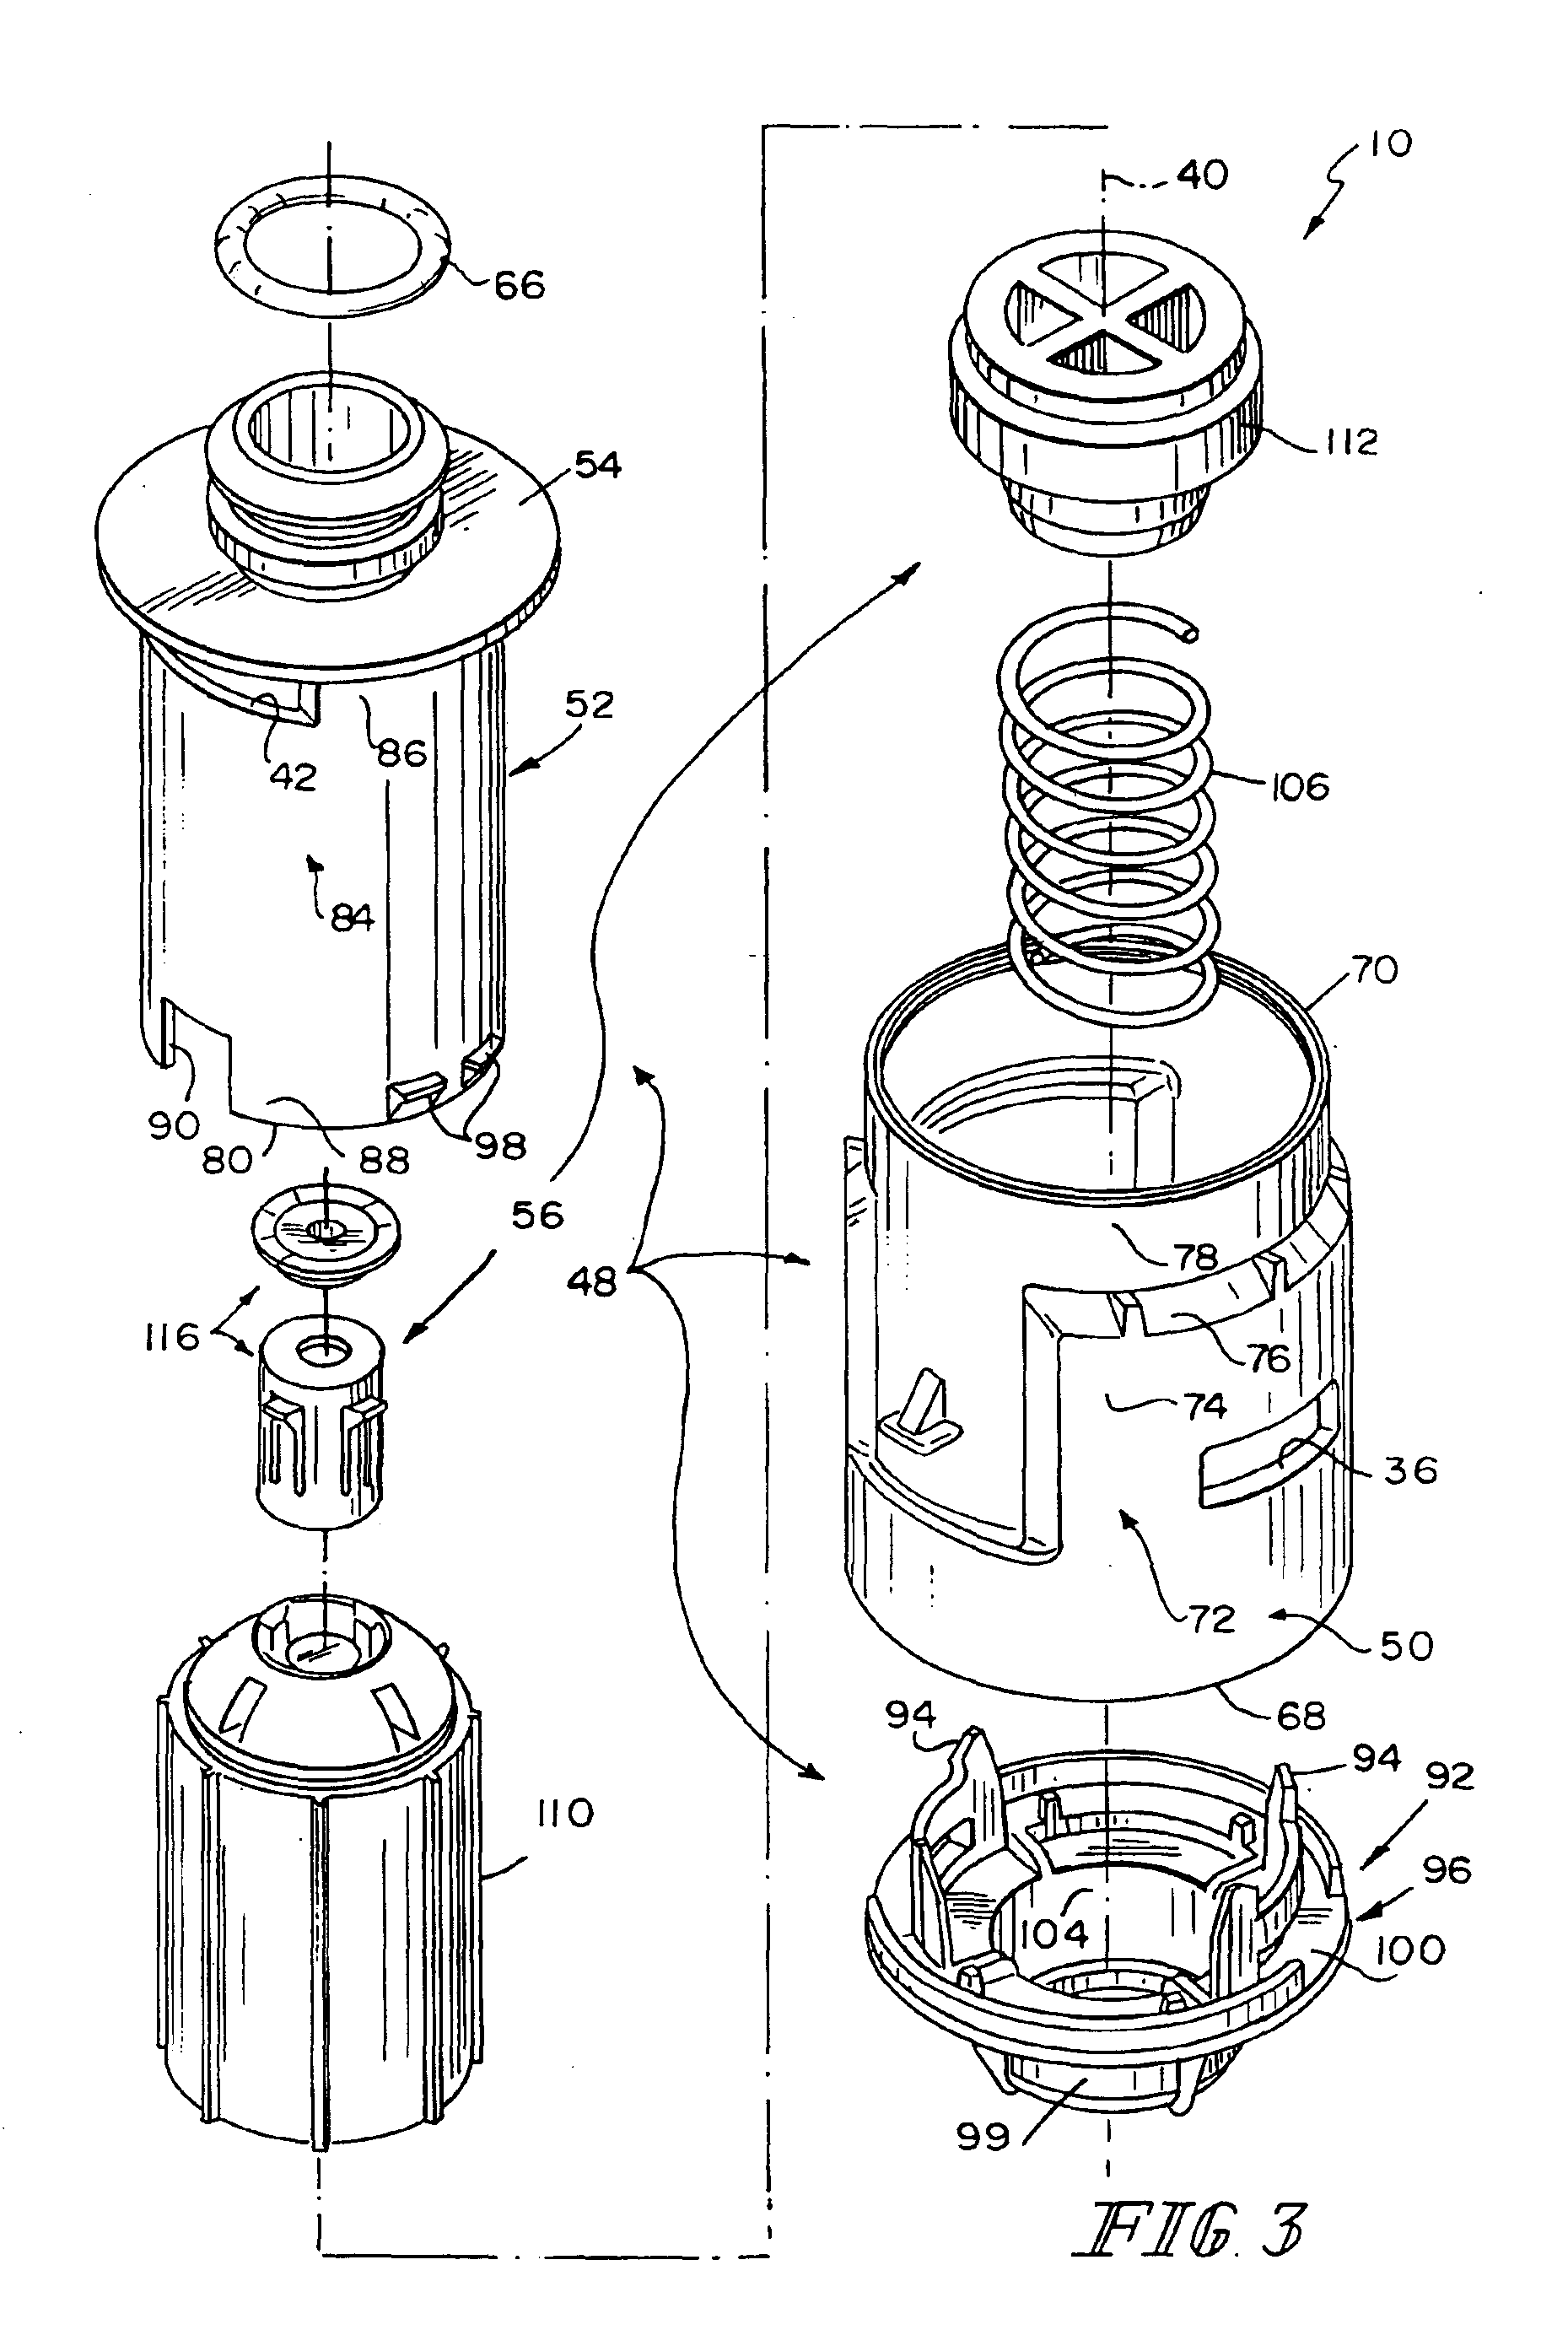 Fuel tank vent system with liquid fuel filter